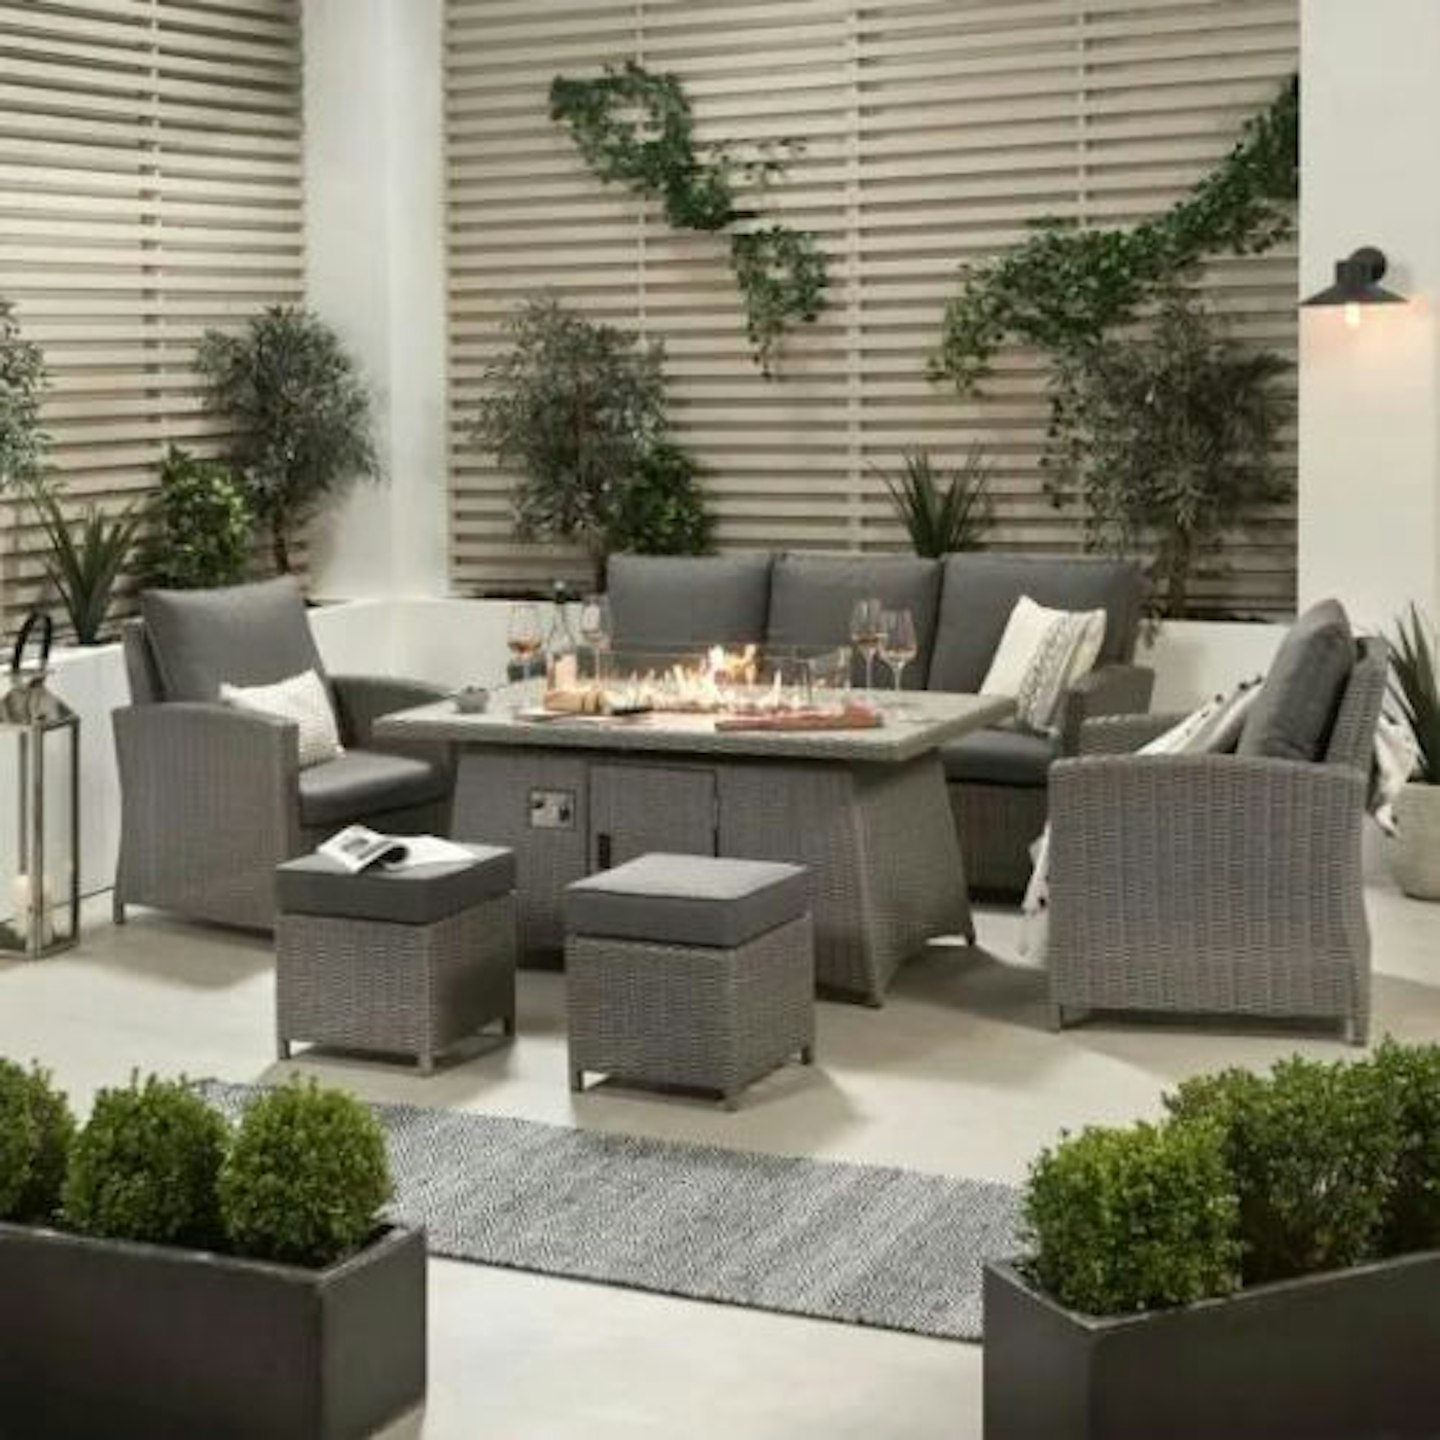 Pacific Lifestyle Barbados Seating (3 Seater Sofa) with Relaxed Dining Fire Pit Table